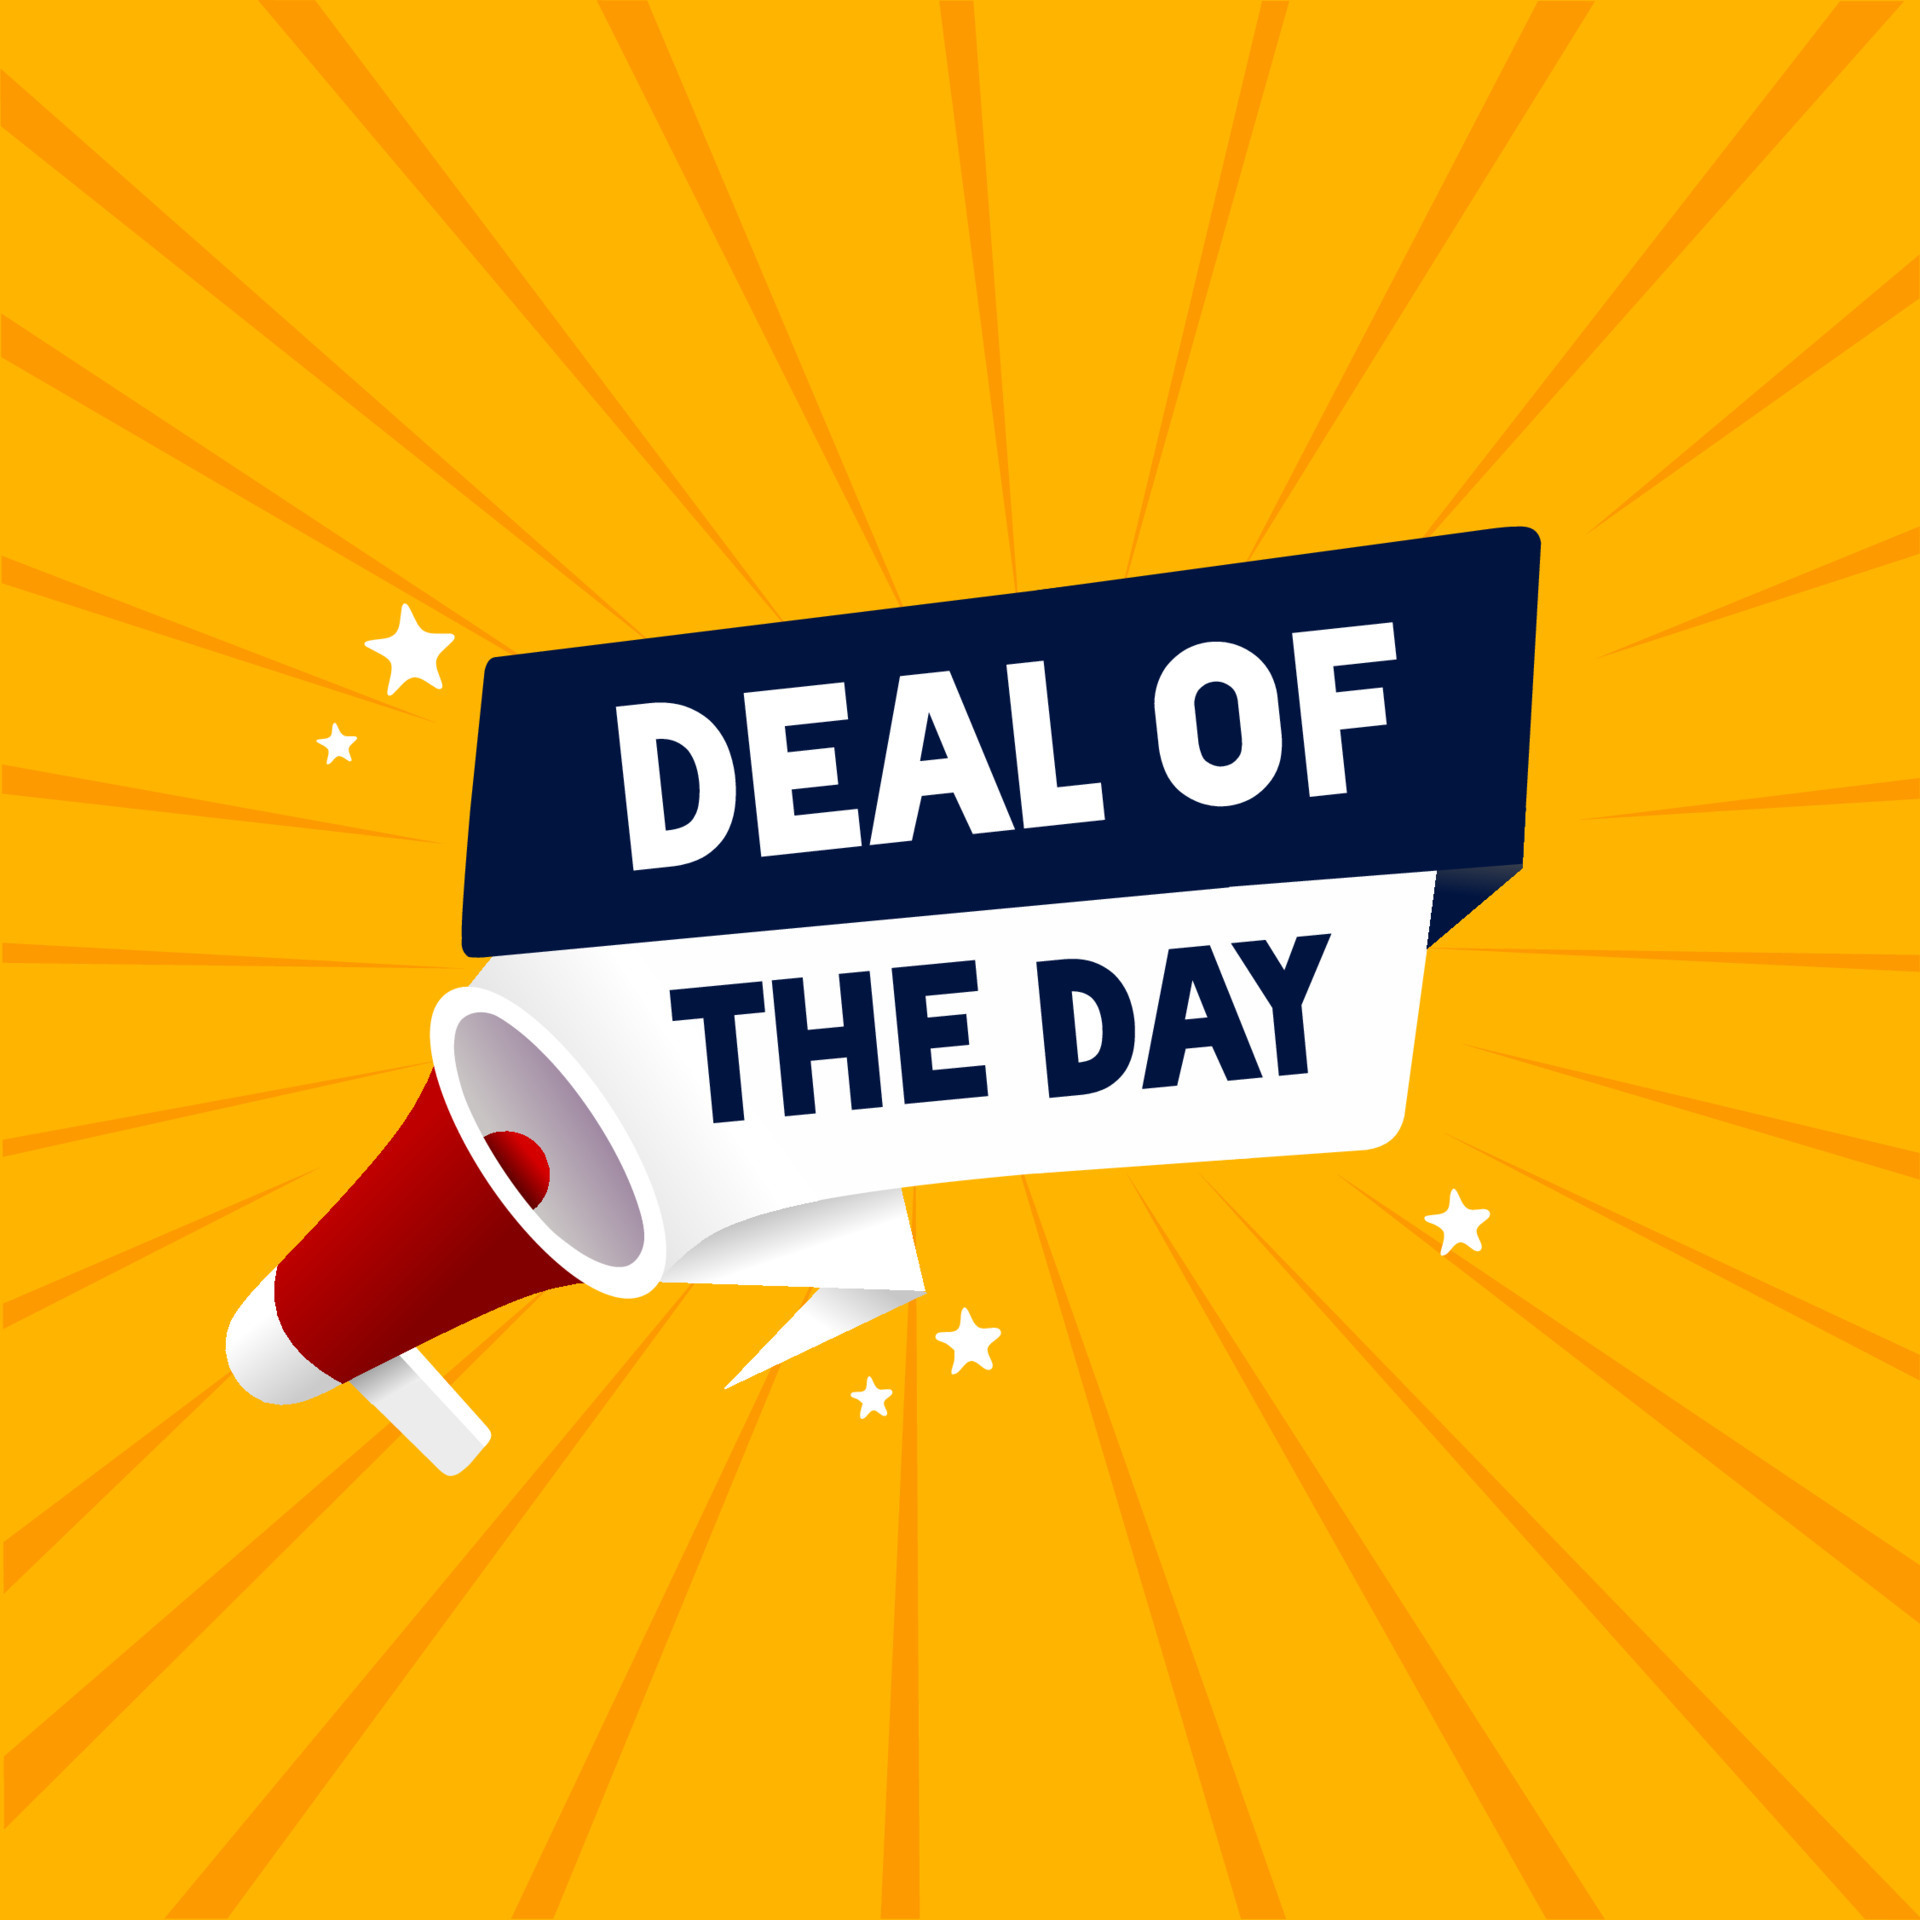 Deal of the day banner with megaphone icon design. Flat style